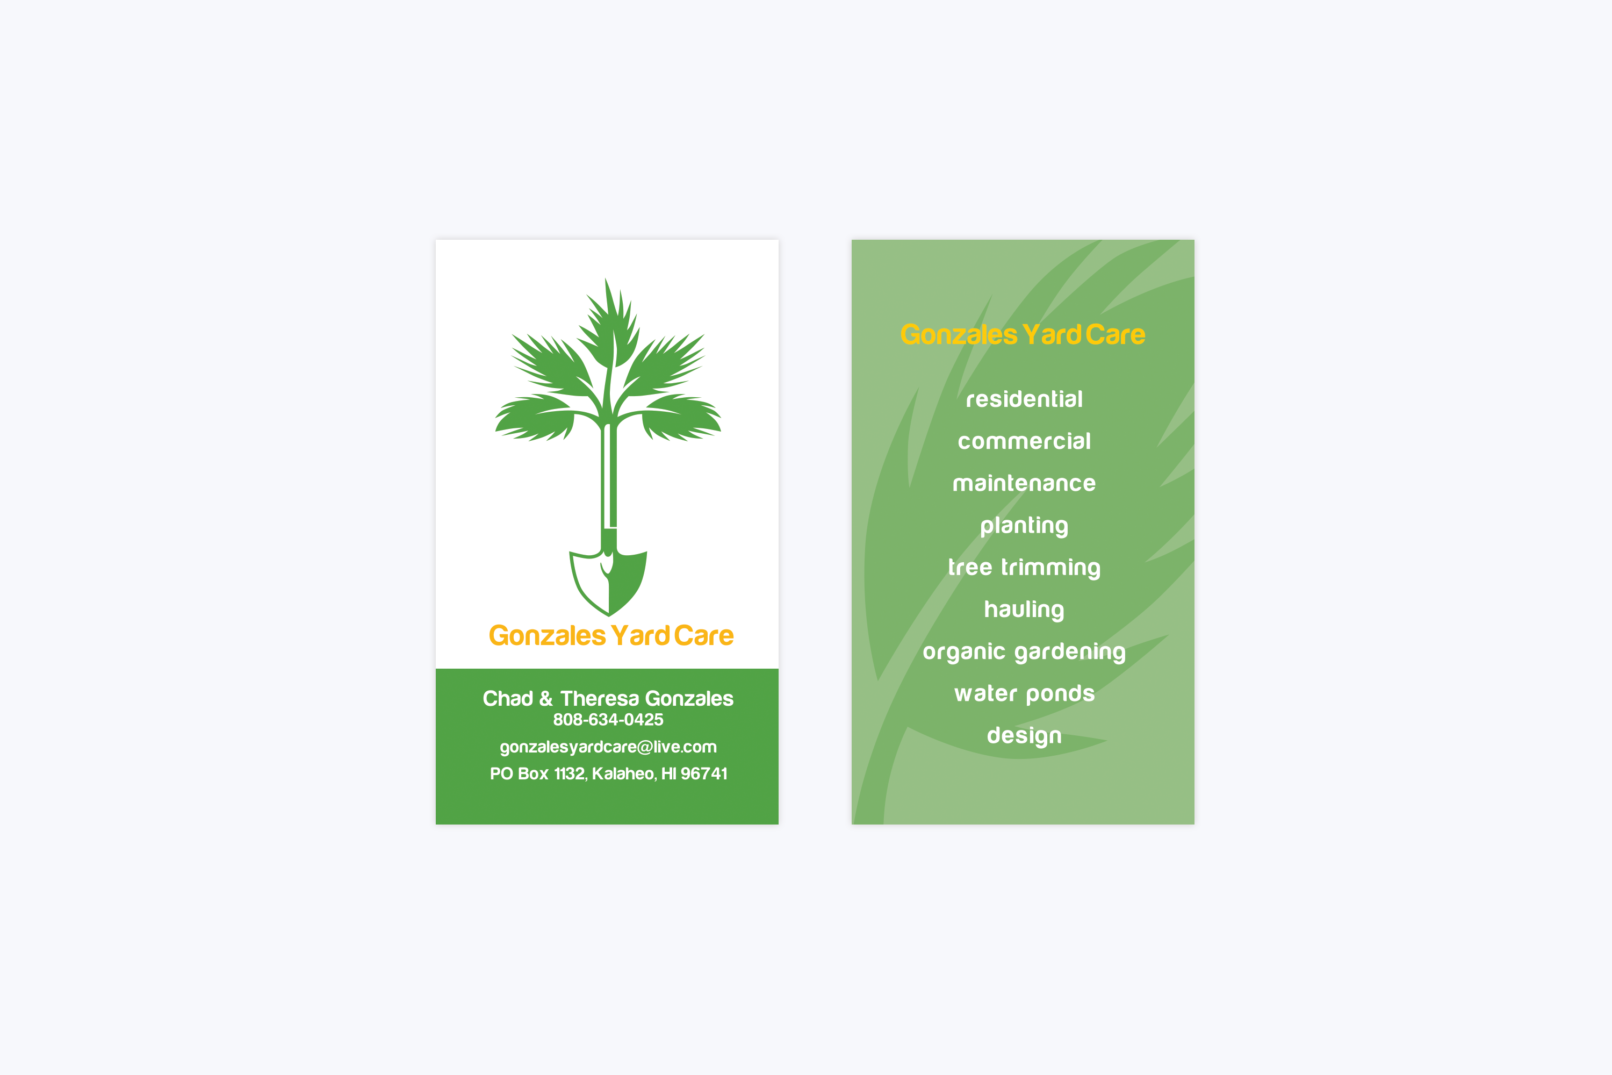 gonzales yard care business card design